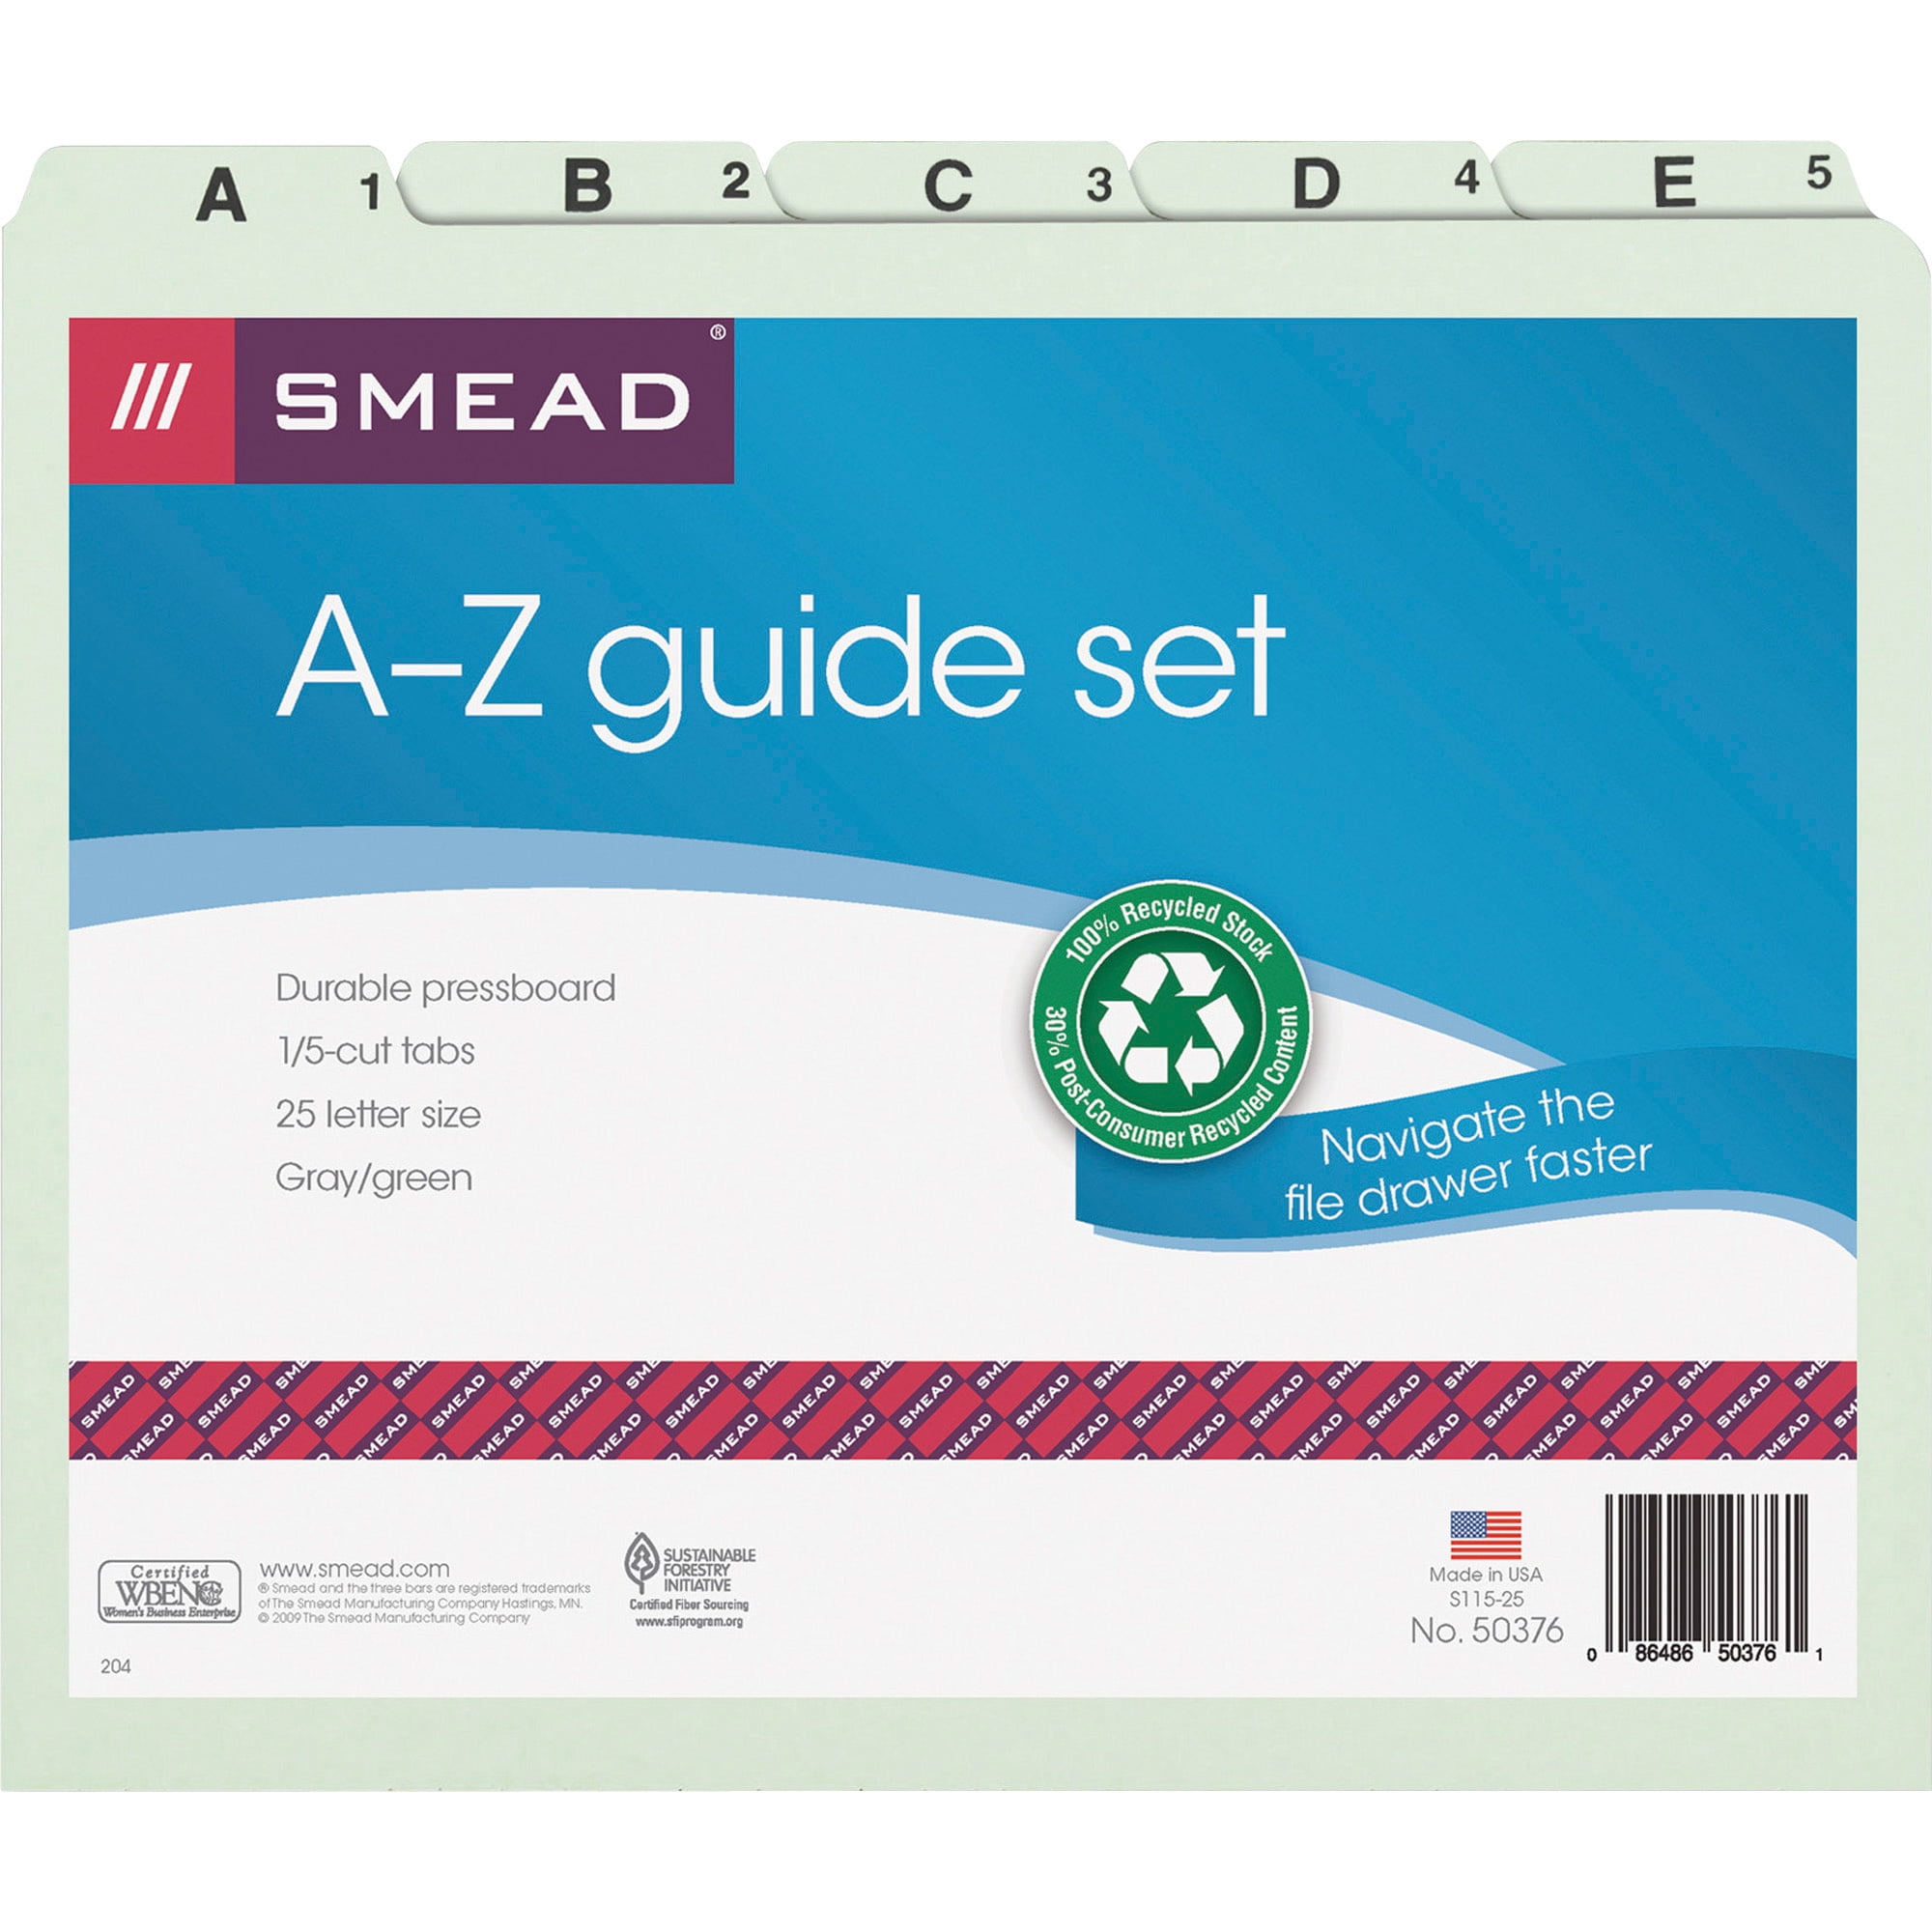 6 Inches x 4 Inches 2 Sets Indexed A-Z Smead Alphabetic Guide Set 56180 